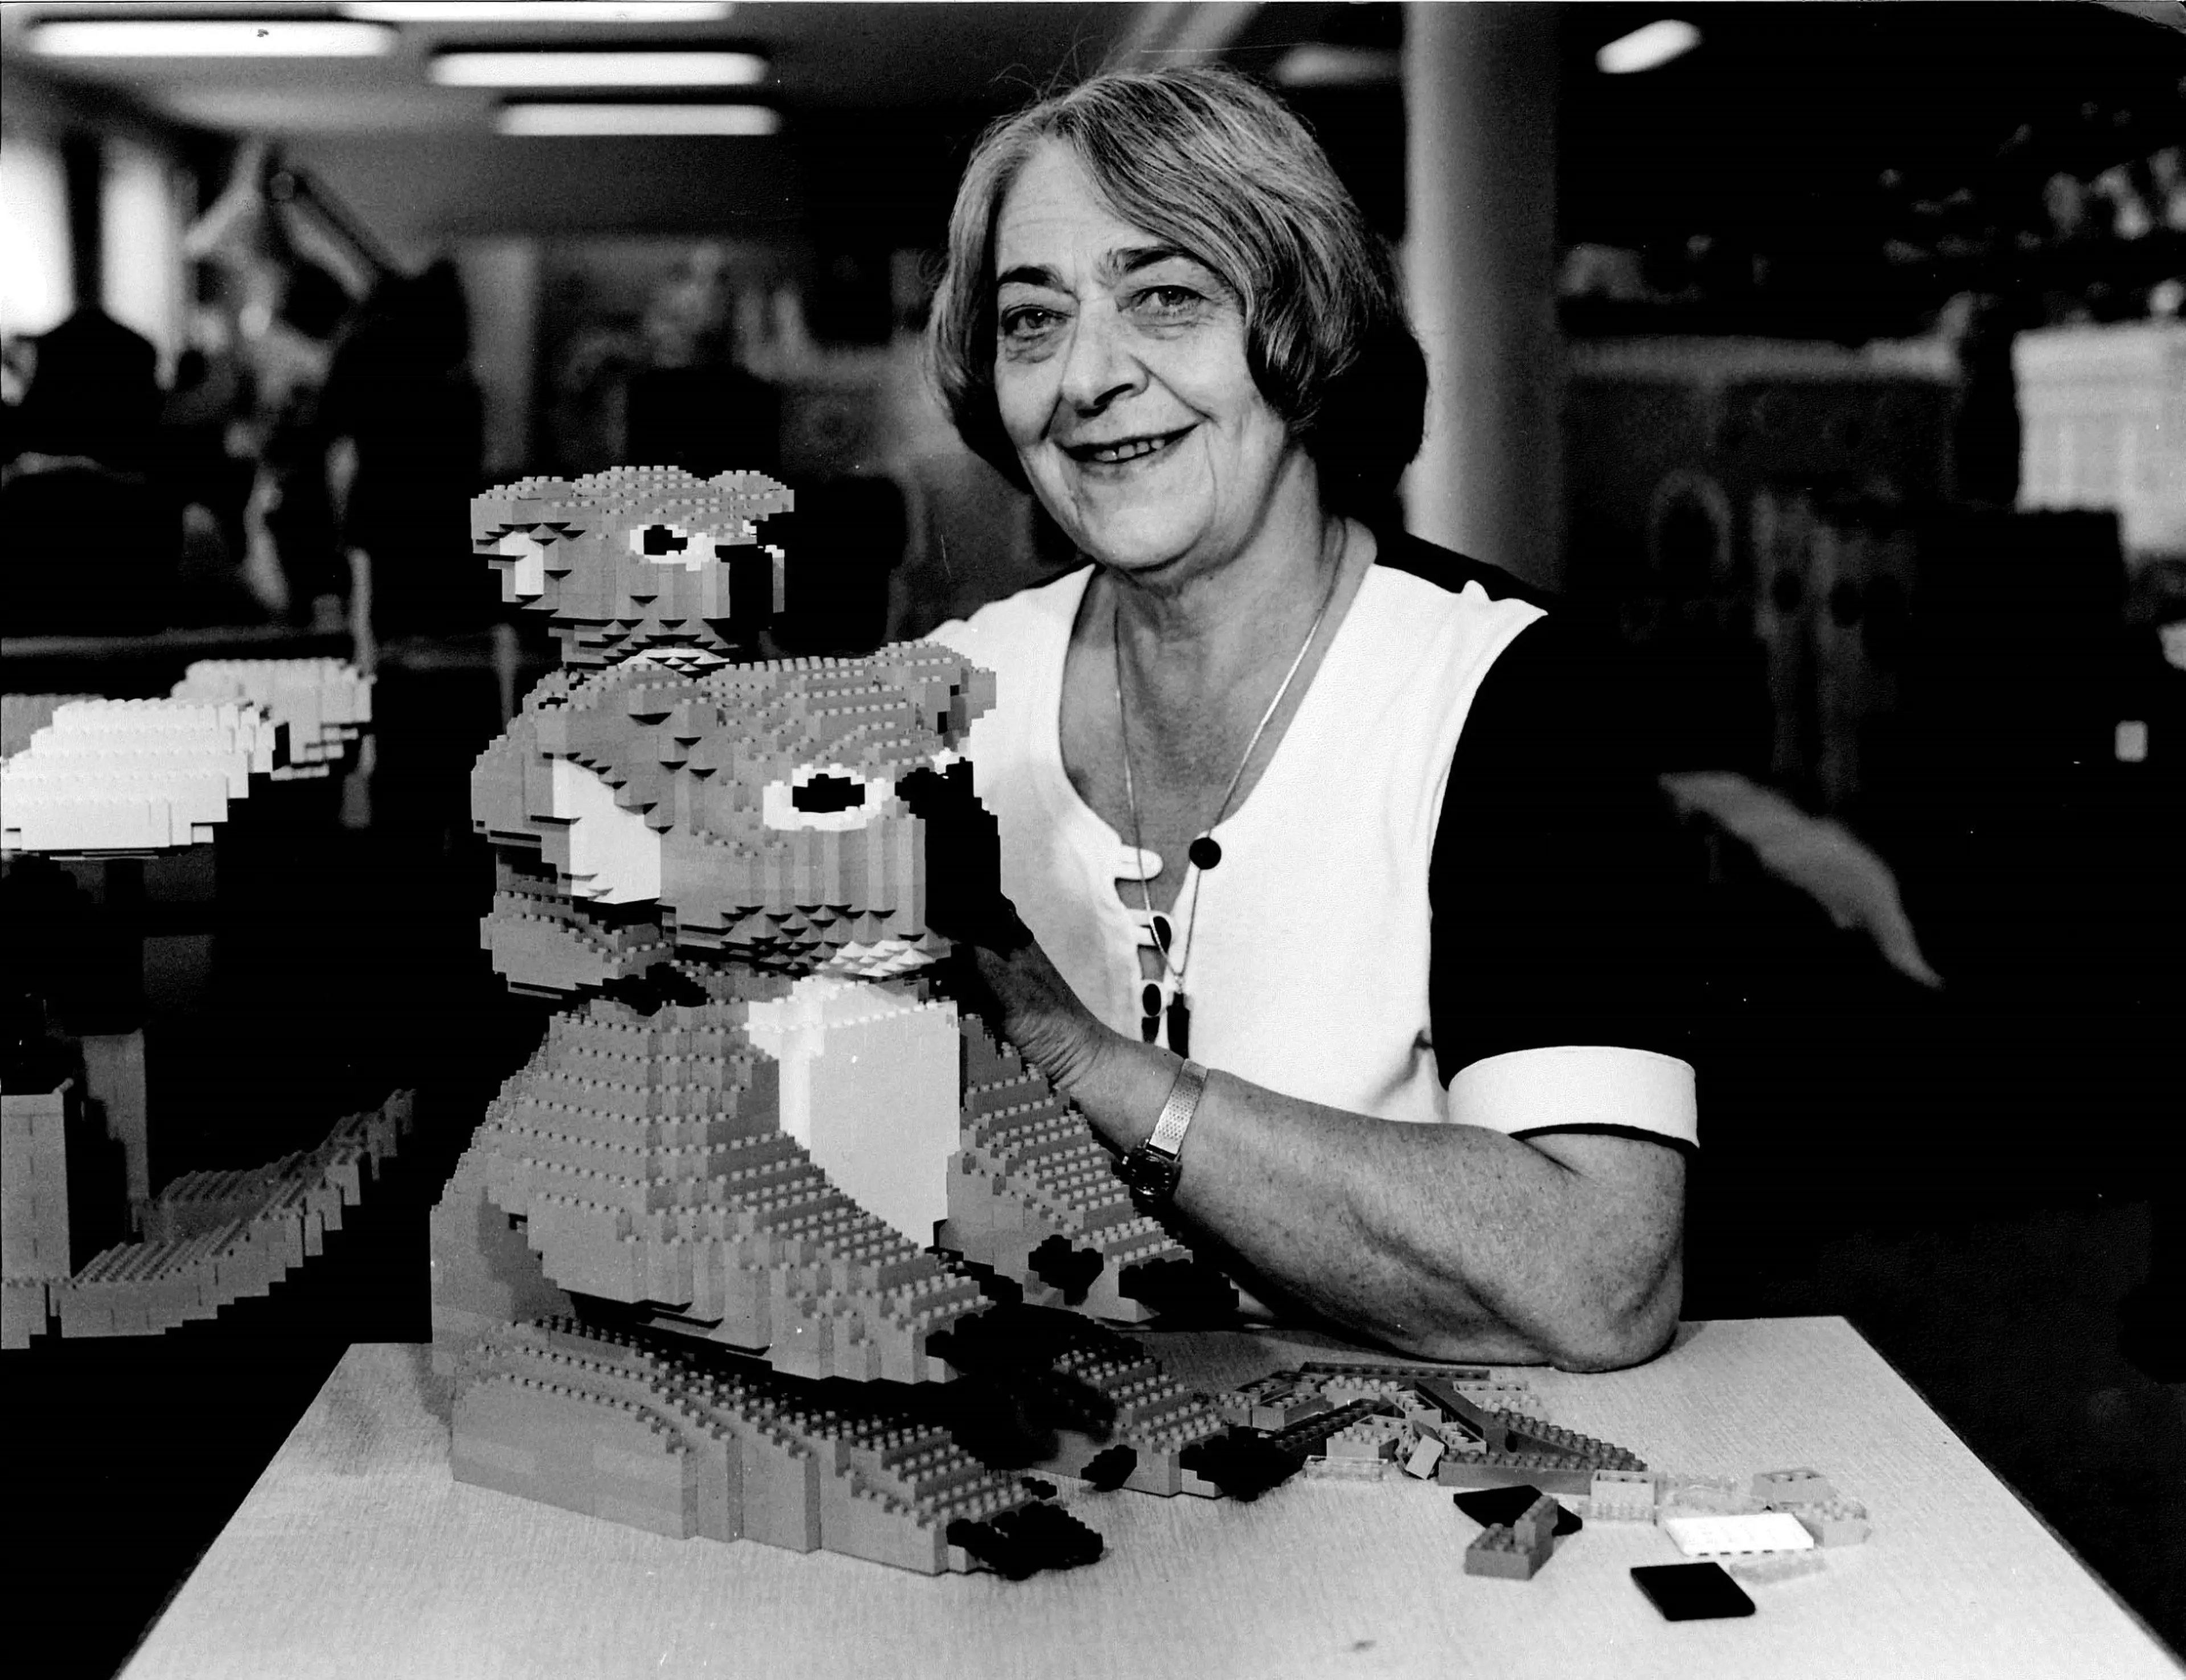 Model builder Dagny Holm posing with one of her creations